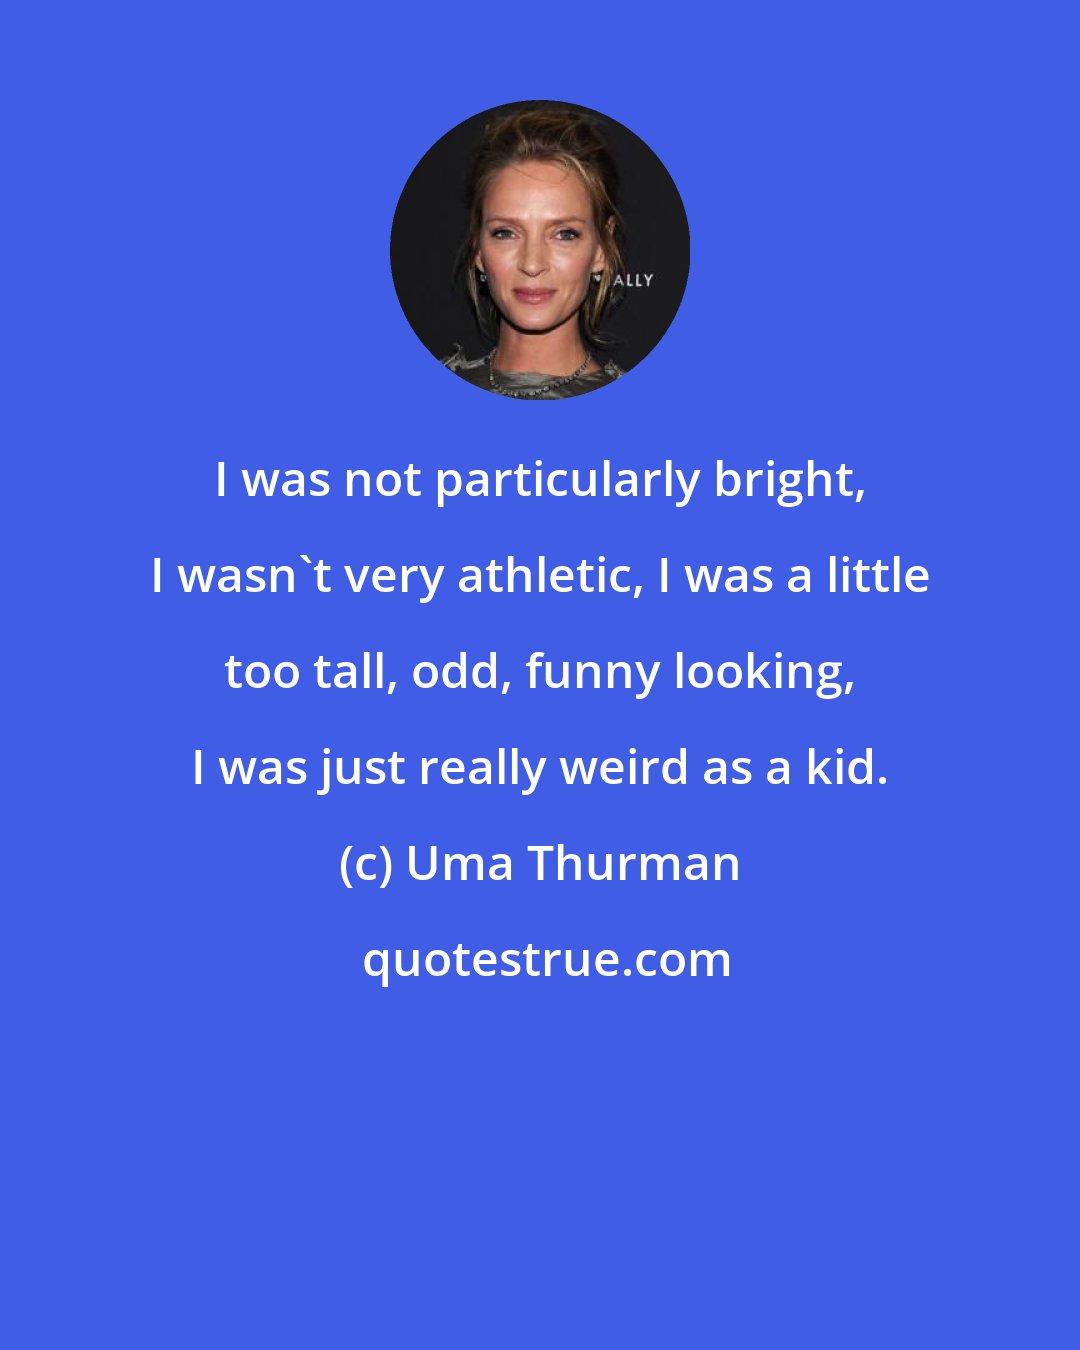 Uma Thurman: I was not particularly bright, I wasn't very athletic, I was a little too tall, odd, funny looking, I was just really weird as a kid.